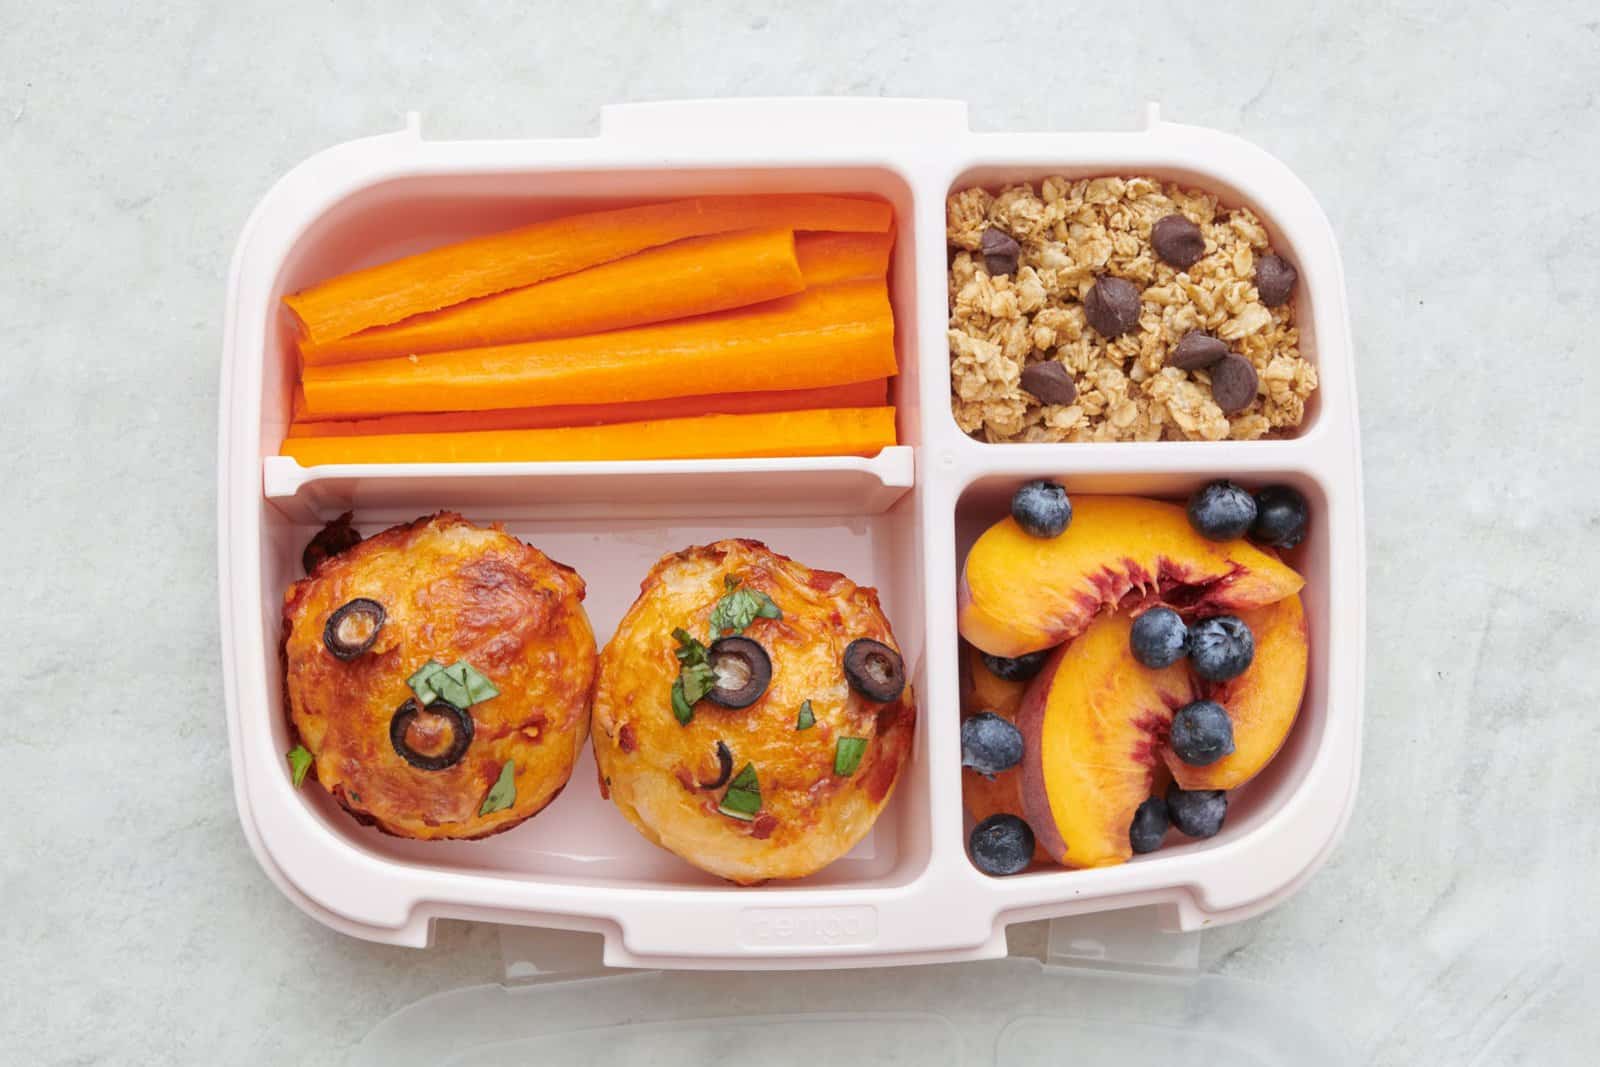 Pizza muffin lunch box with carrot sticks, granola, and sliced peaches and blueberries.